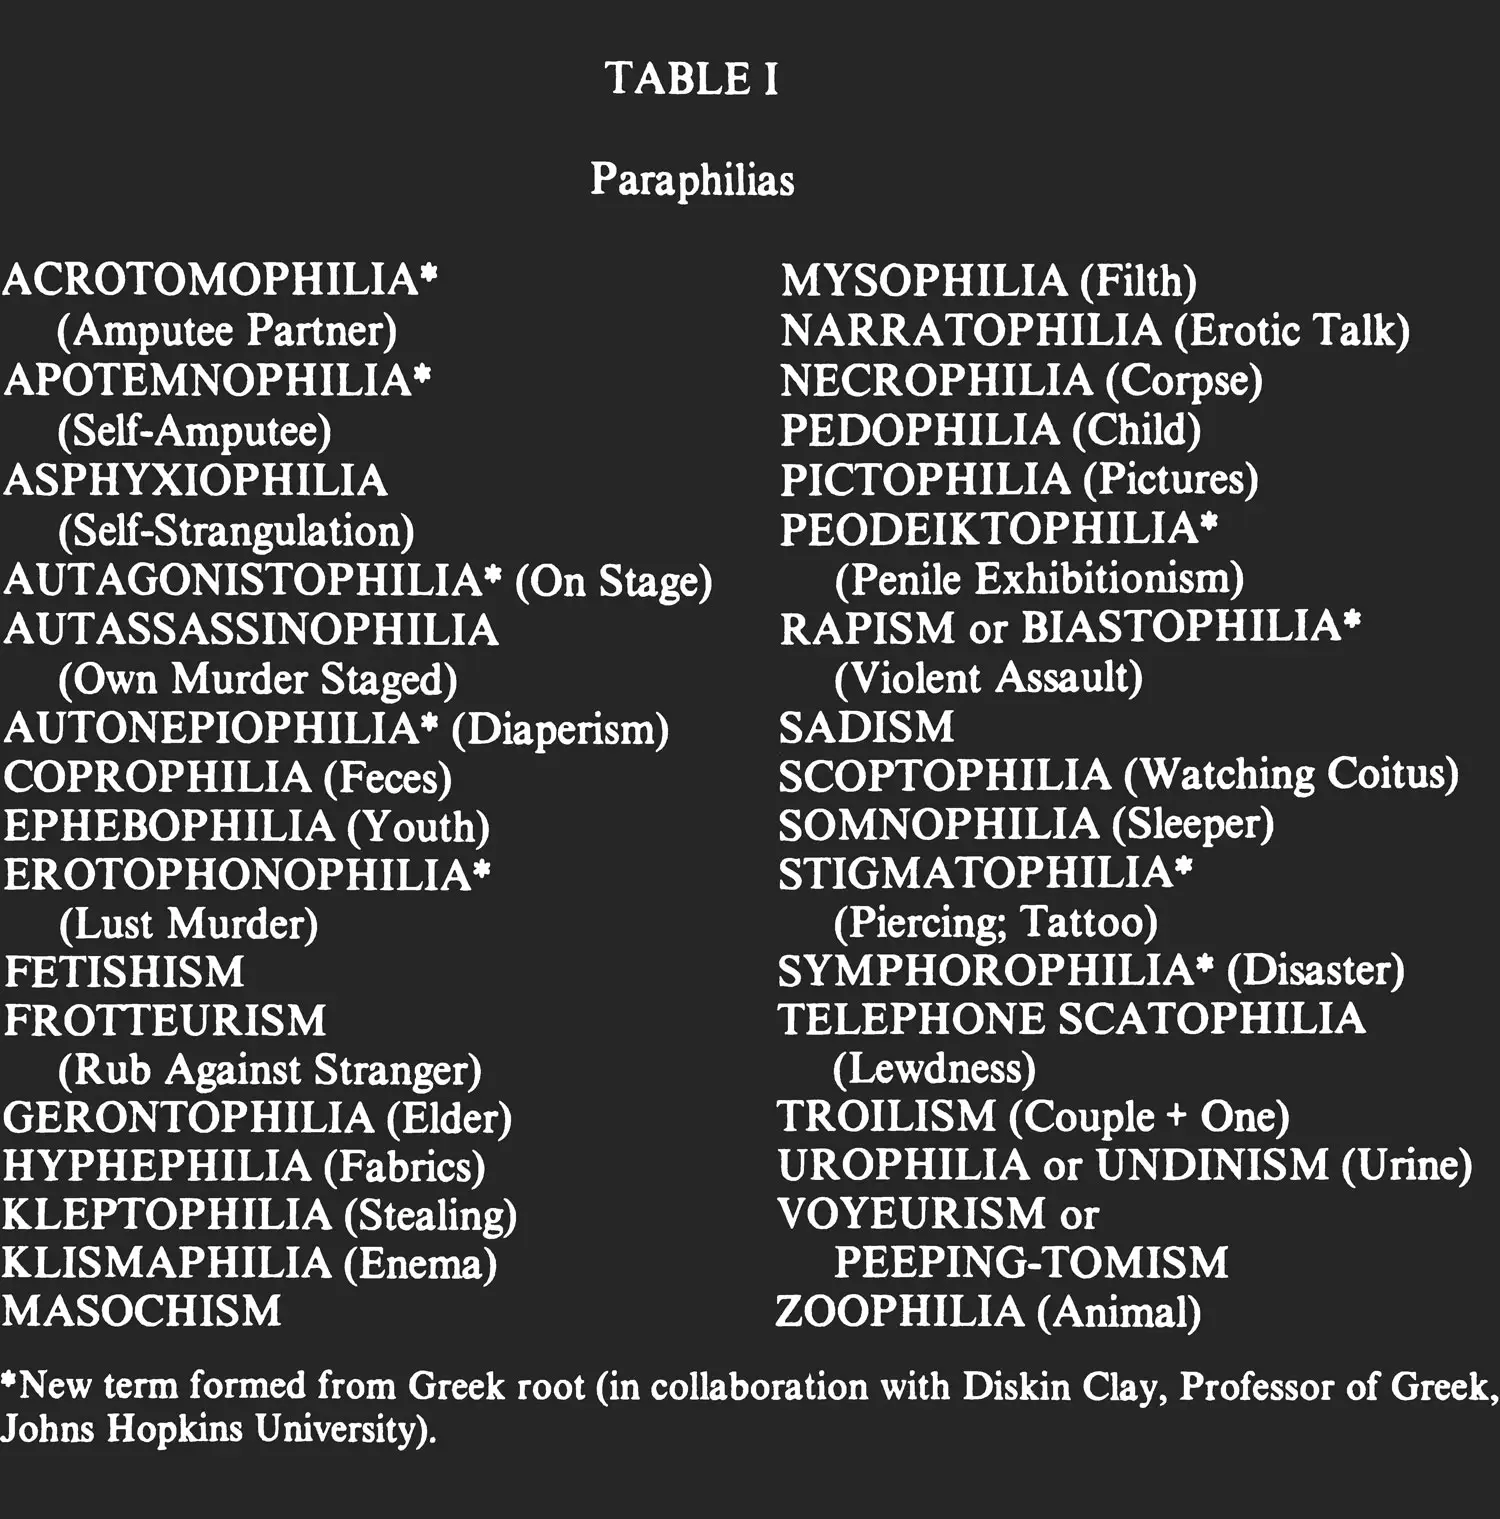 A table of 33 “Paraphilias” such as “FROTTEURISM”, rub against stranger, or “GERONTOPHILIA,” elder, or “NARRATOPHILIA,” erotic talk. Some words are marked as a “New Term formed from Greek root” in collaboration with a John Hopkins Professor of Greek, such as “STIGMATOPHILIA,” piercing; tattoo. 